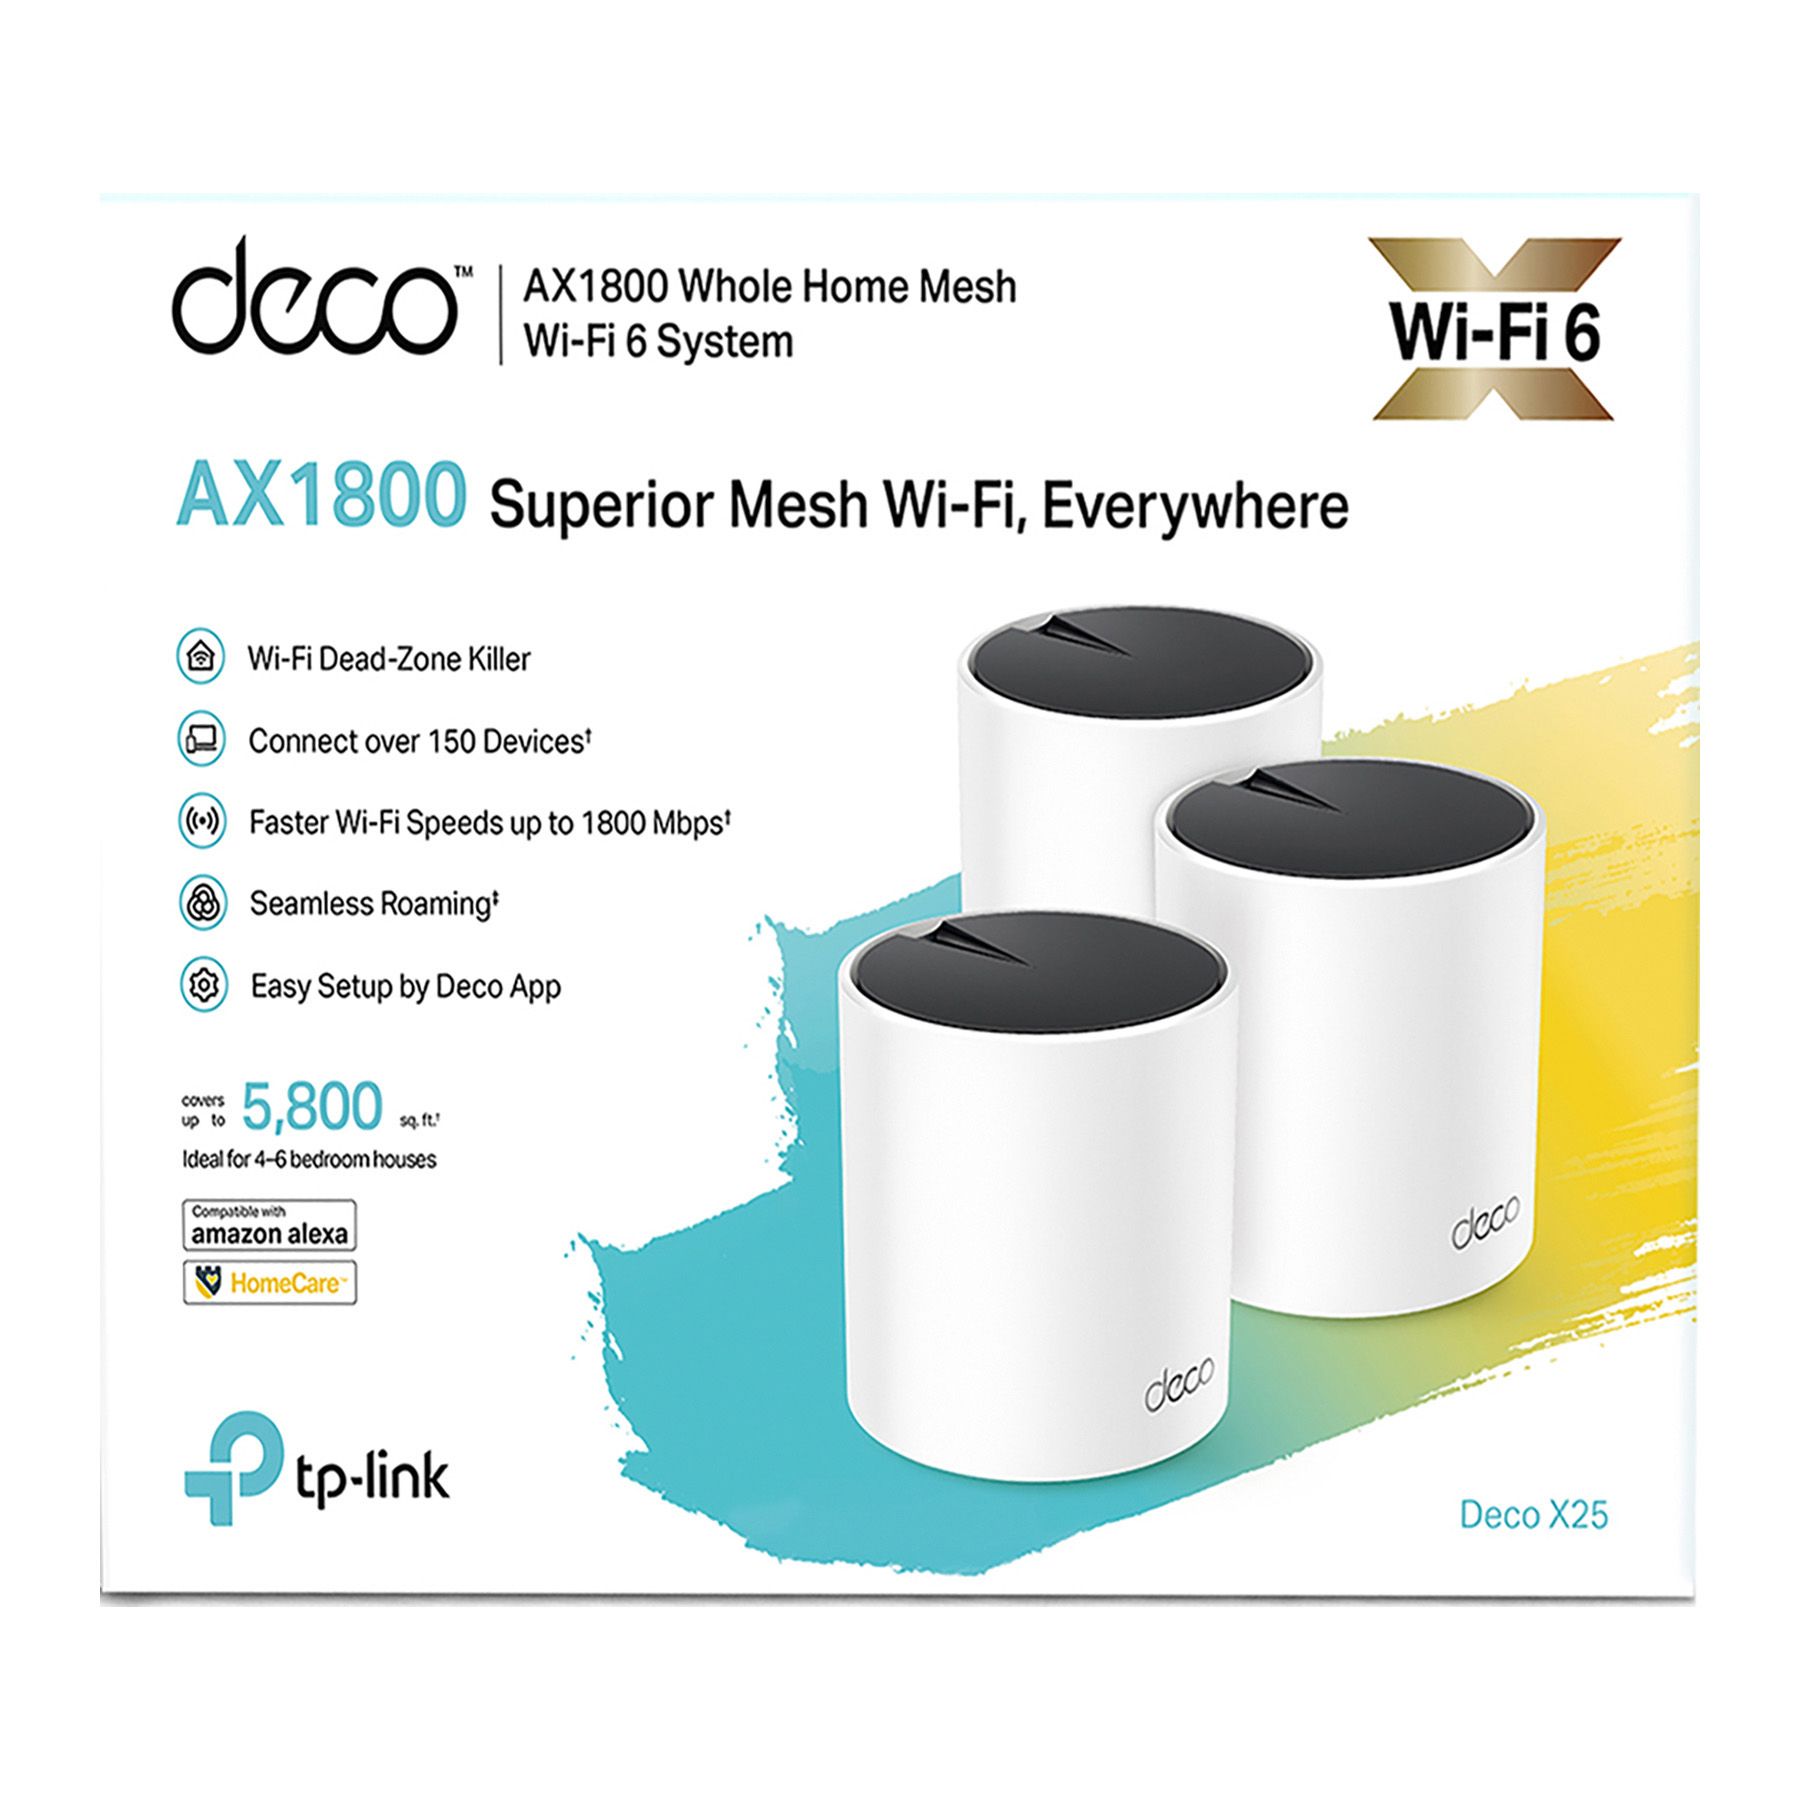 TP Link Deco M4 Home Wi-Fi Mesh System Review